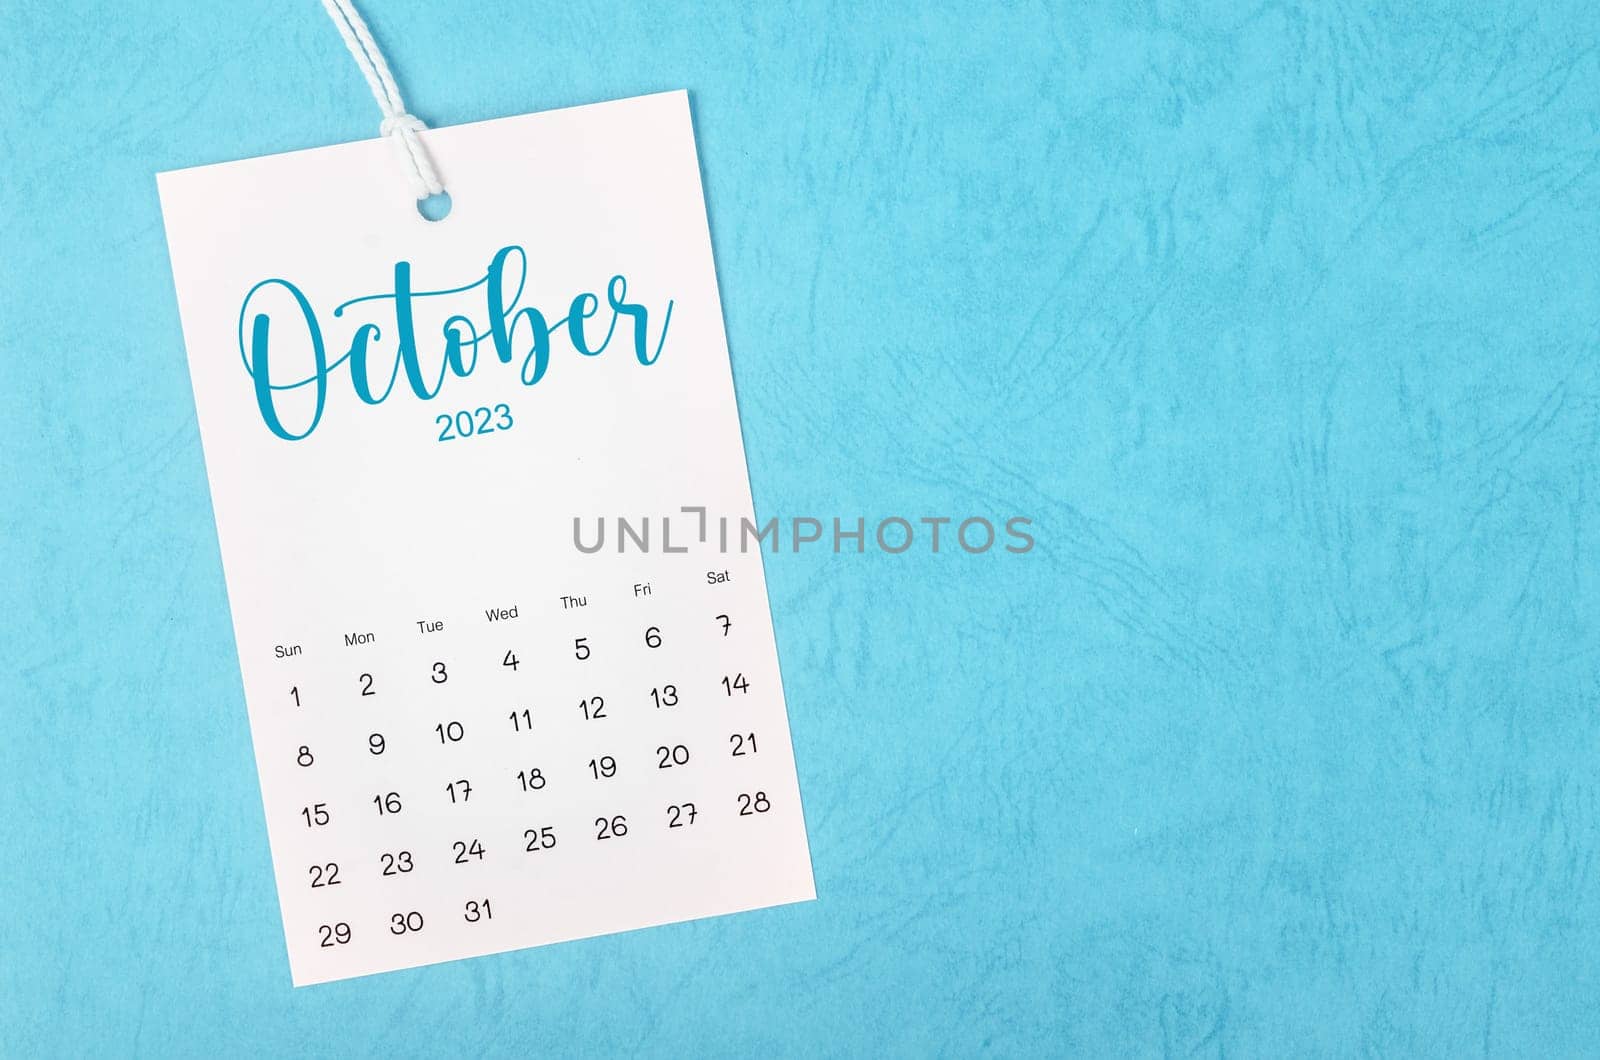 2023 October calendar page hanged on white rope on blue background.